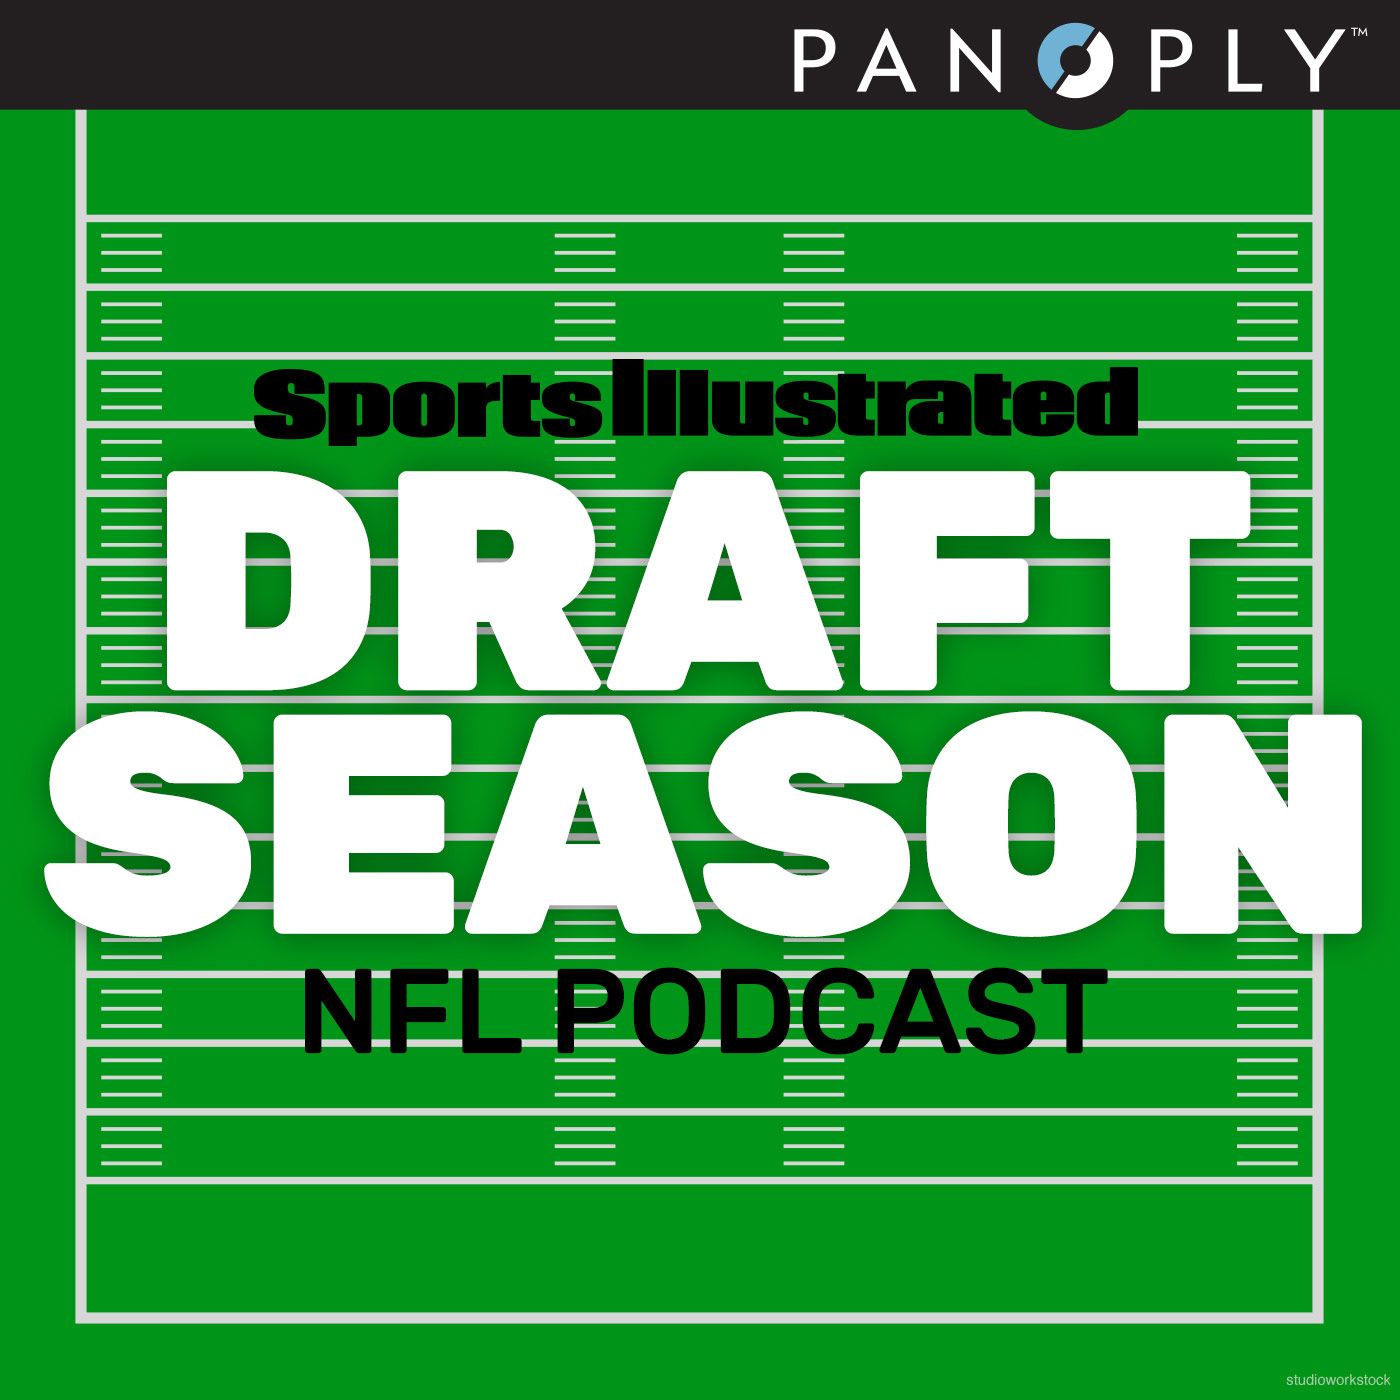 John and Nathan Theus, the brothers entering the NFL | S1, Episode 5